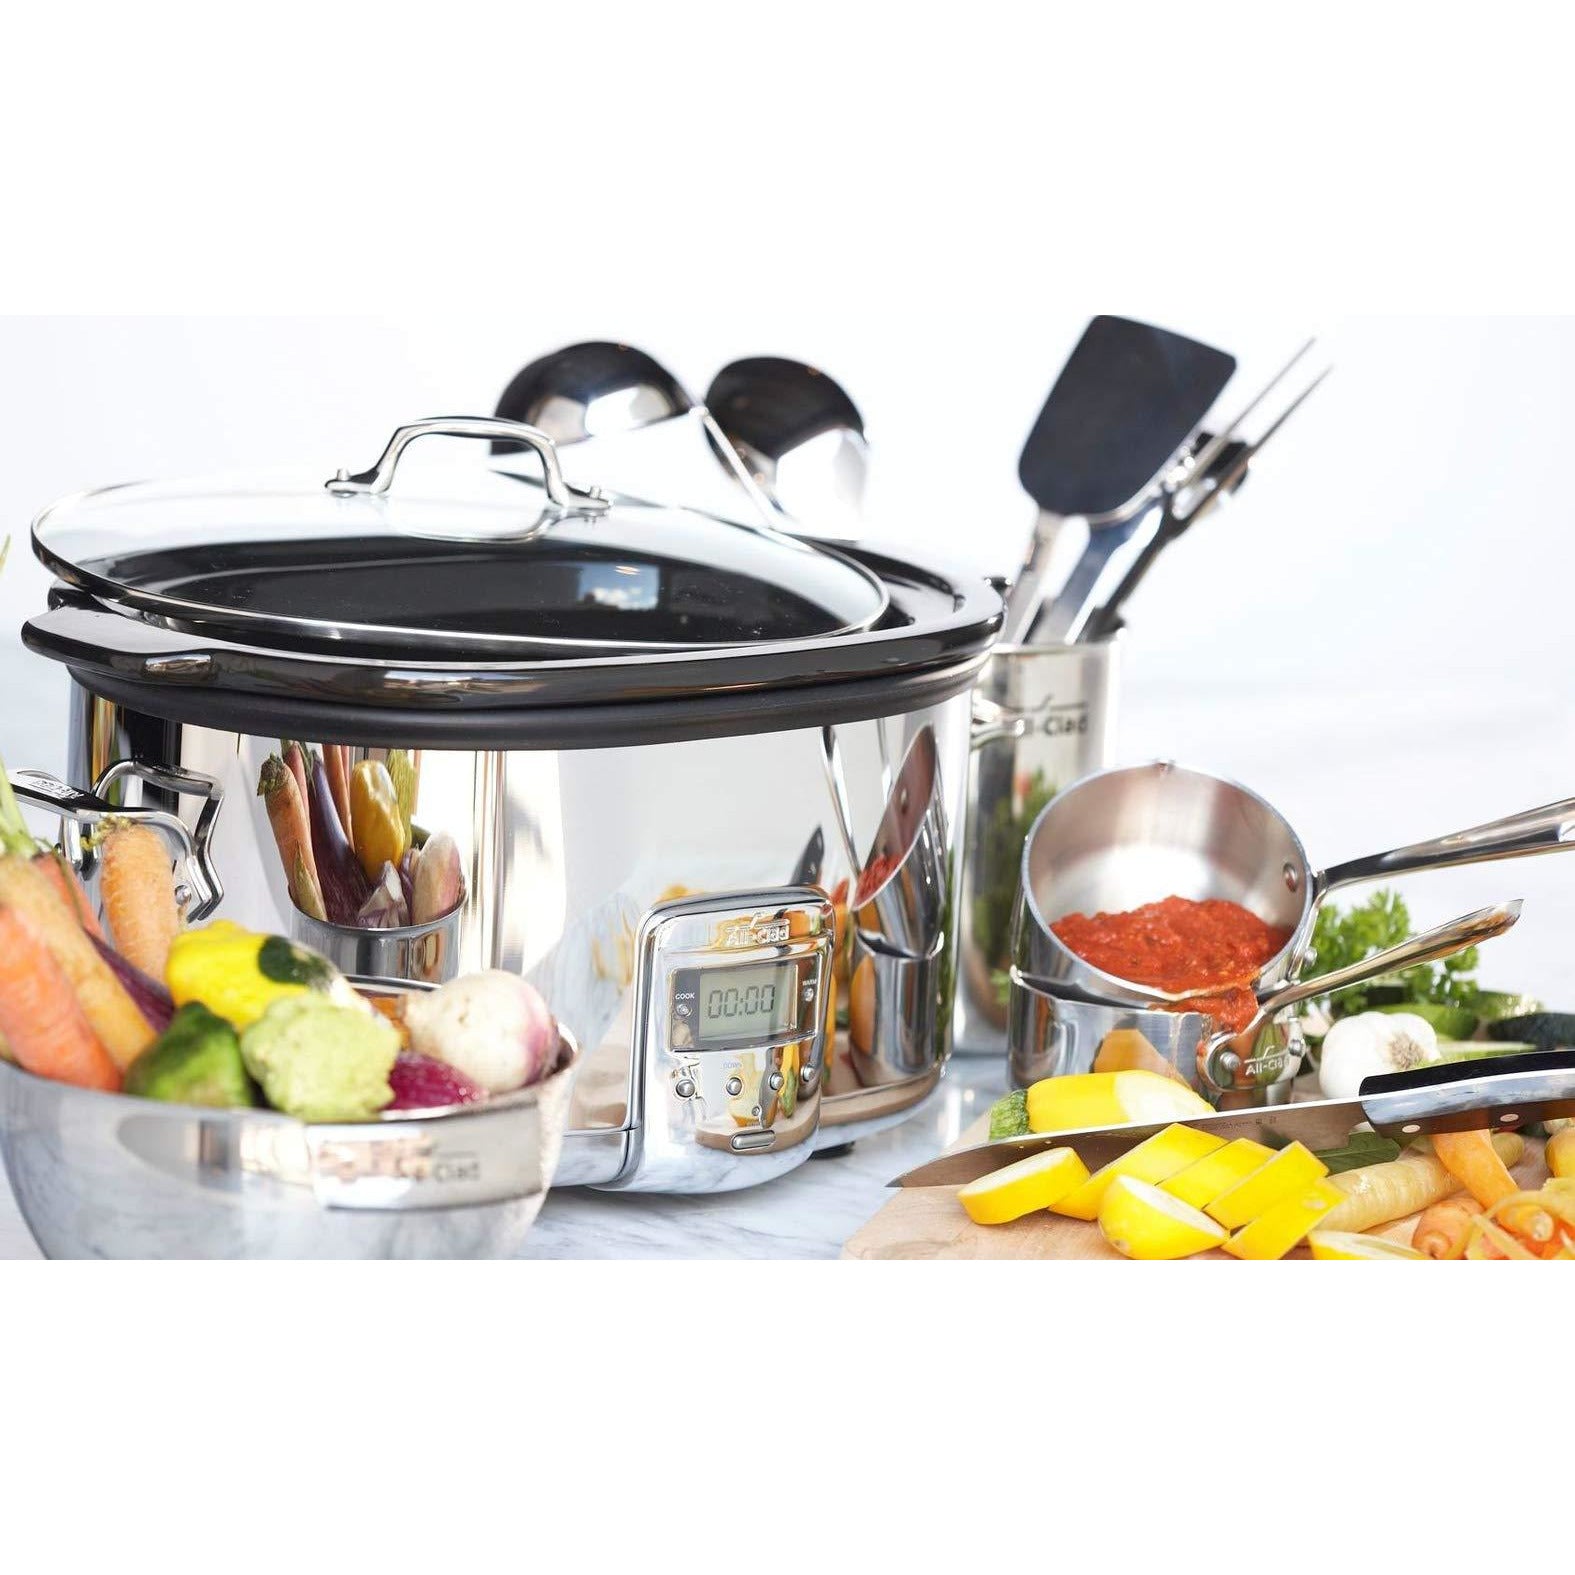 All-Clad Stainless Steel & Glass Slow Cookers